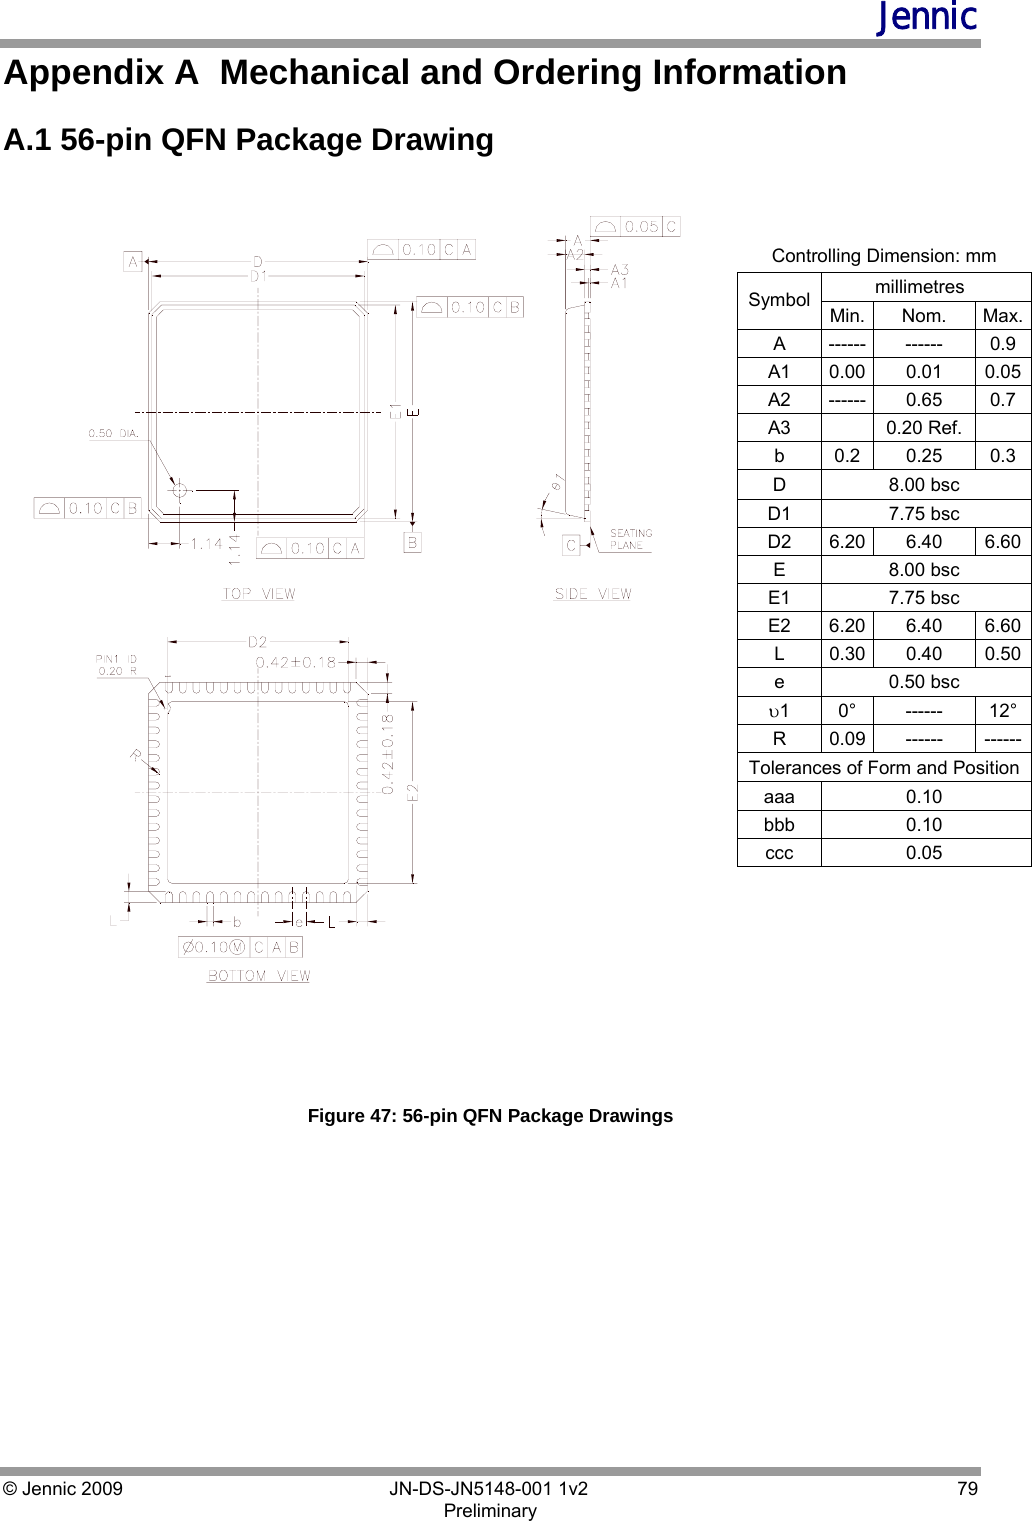 Jennic © Jennic 2009        JN-DS-JN5148-001 1v2  79 Preliminary  Appendix A  Mechanical and Ordering Information A.1 56-pin QFN Package Drawing   Figure 47: 56-pin QFN Package Drawings Controlling Dimension: mm    millimetres Symbol  Min. Nom. Max.A ------ ------  0.9 A1 0.00 0.01  0.05A2 ------ 0.65  0.7 A3     0.20 Ref.    b 0.2 0.25 0.3 D     8.00 bsc    D1     7.75 bsc    D2 6.20  6.40  6.60E     8.00 bsc    E1     7.75 bsc    E2 6.20 6.40  6.60L 0.30 0.40 0.50e     0.50 bsc    υ1 0° ------ 12° R 0.09 ------ ------Tolerances of Form and Position aaa     0.10    bbb     0.10    ccc     0.05    